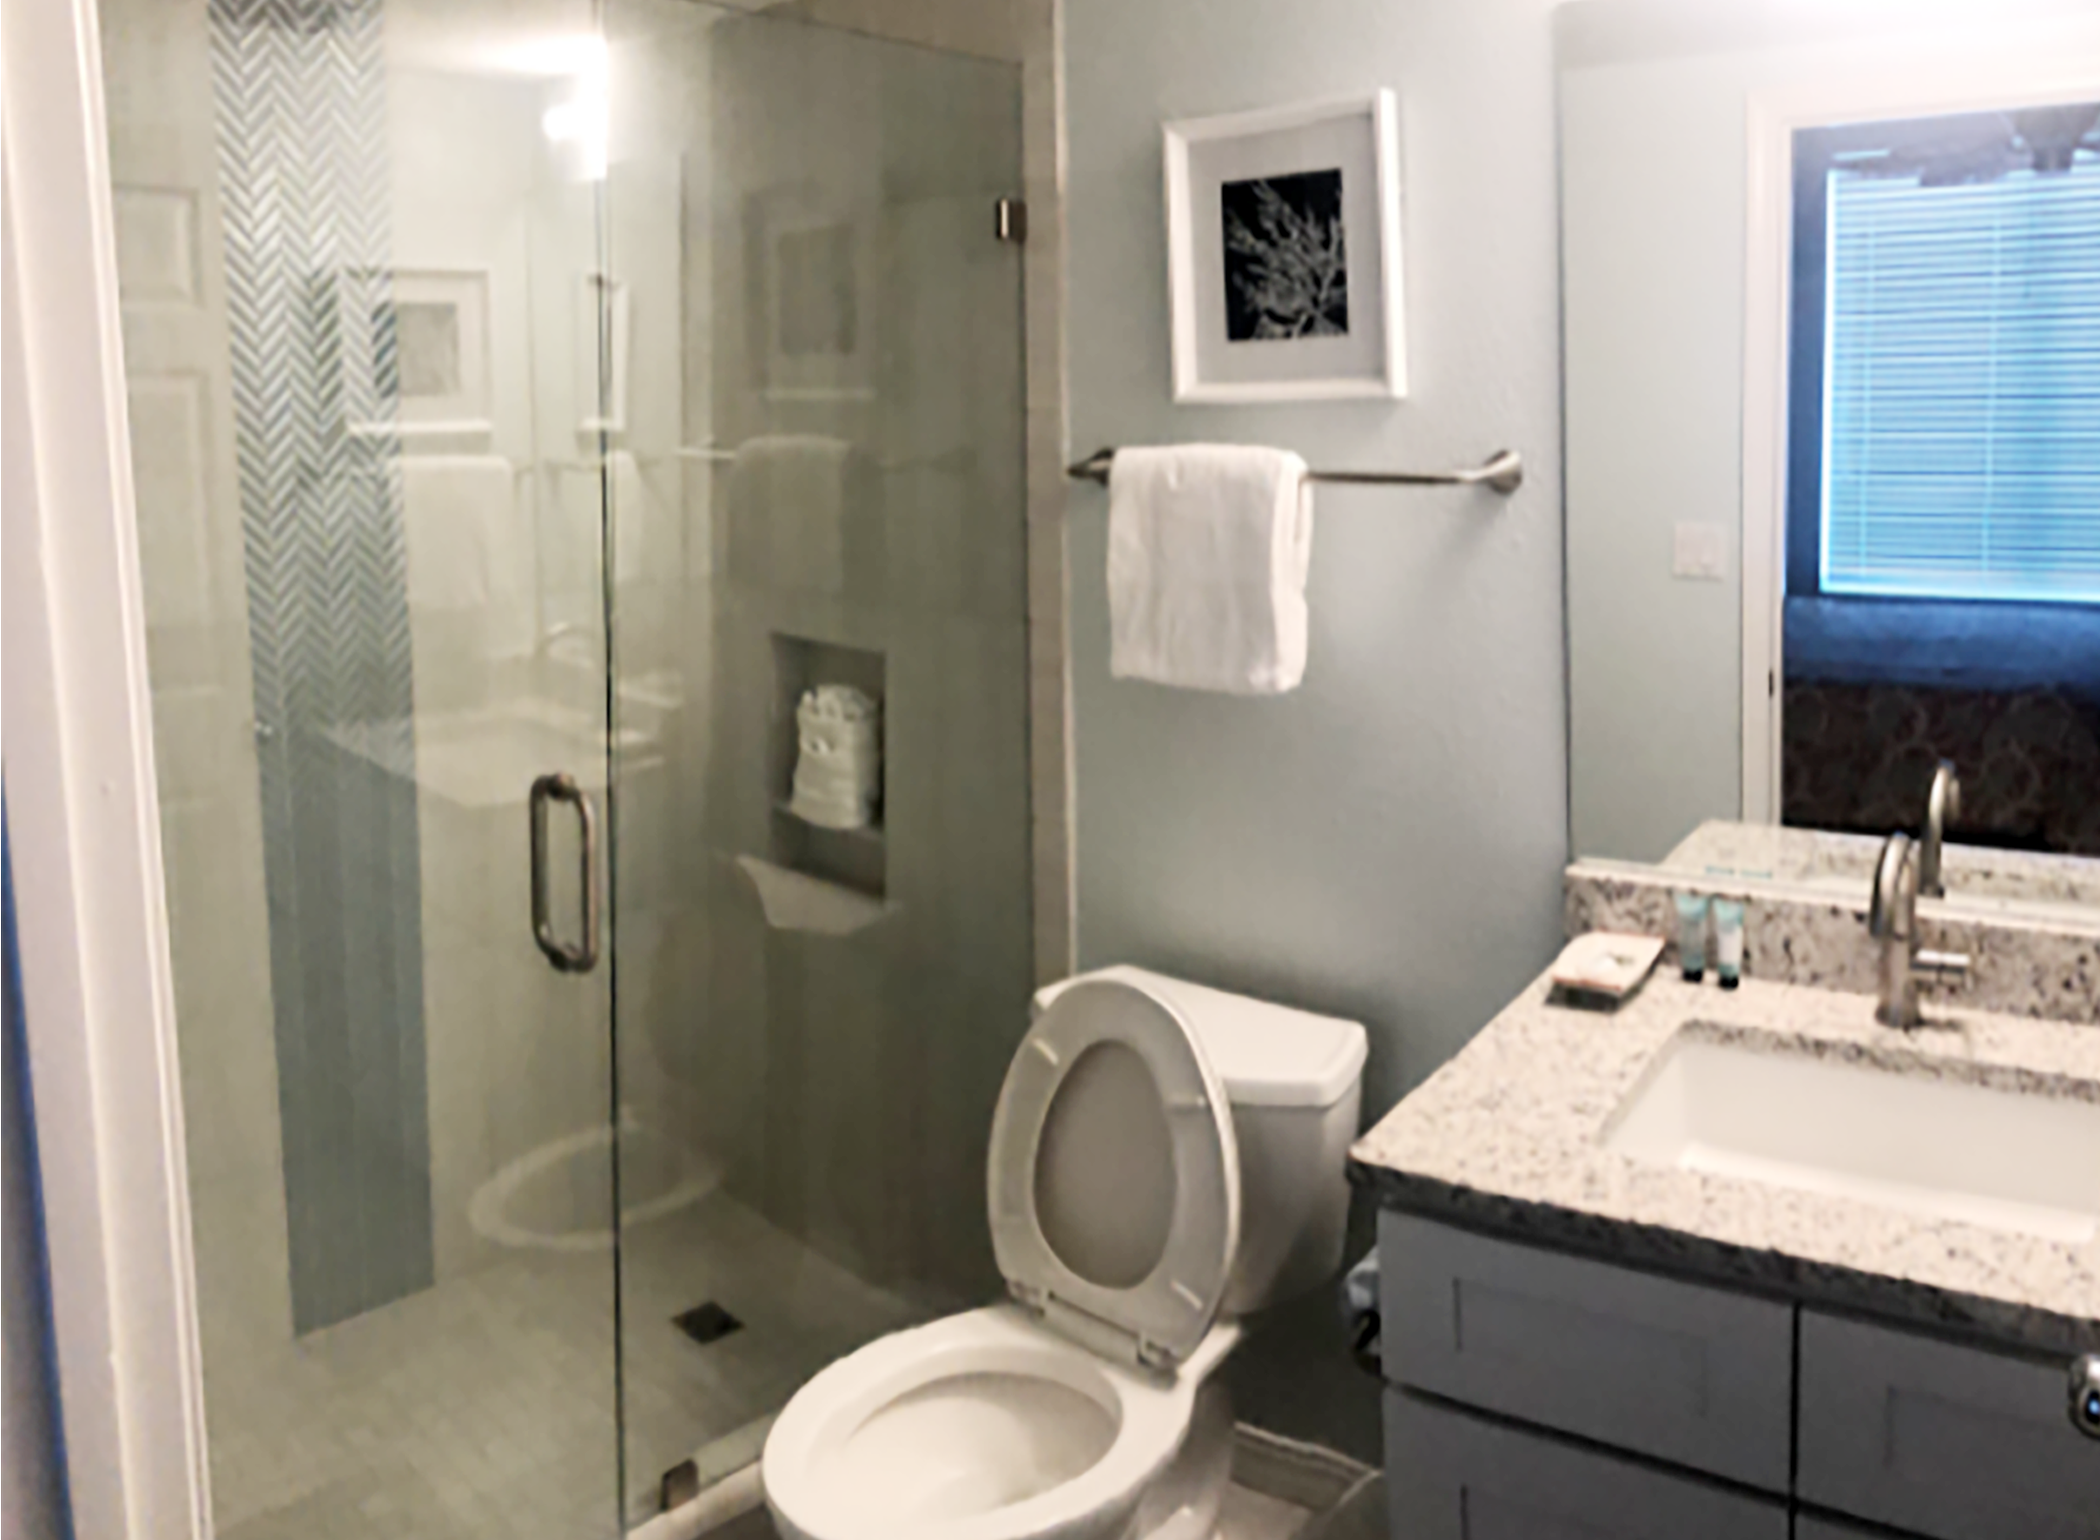 Full guest bath with walk-in shower